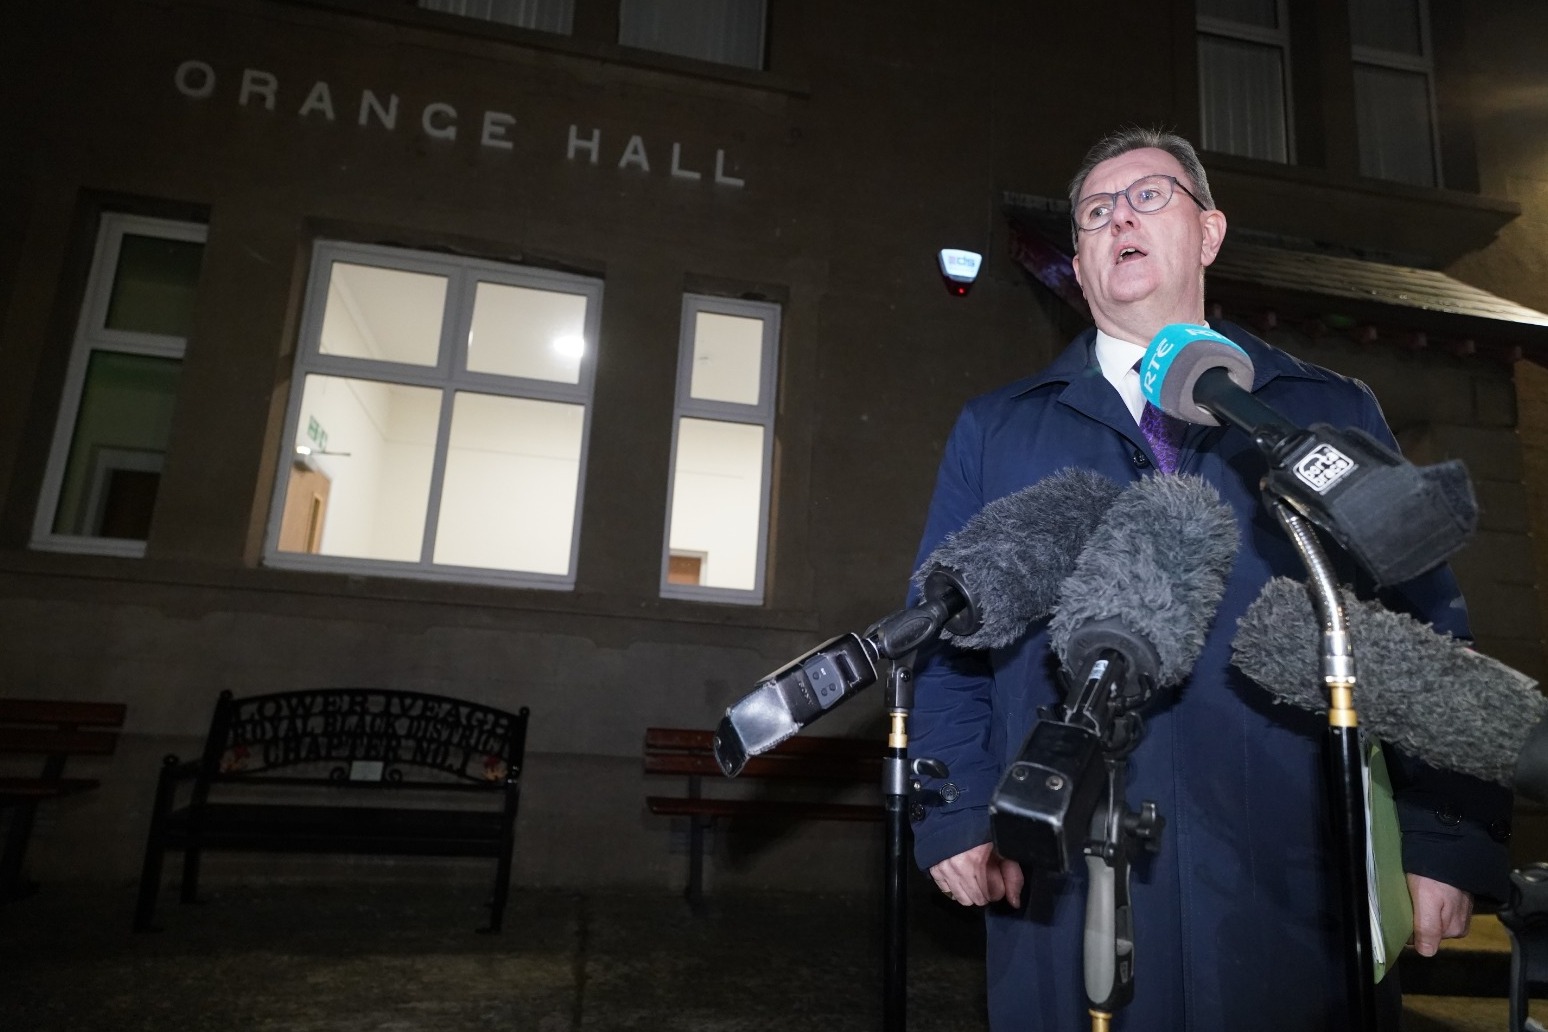 Little chance of progress over protocol before elections DUP leader warns